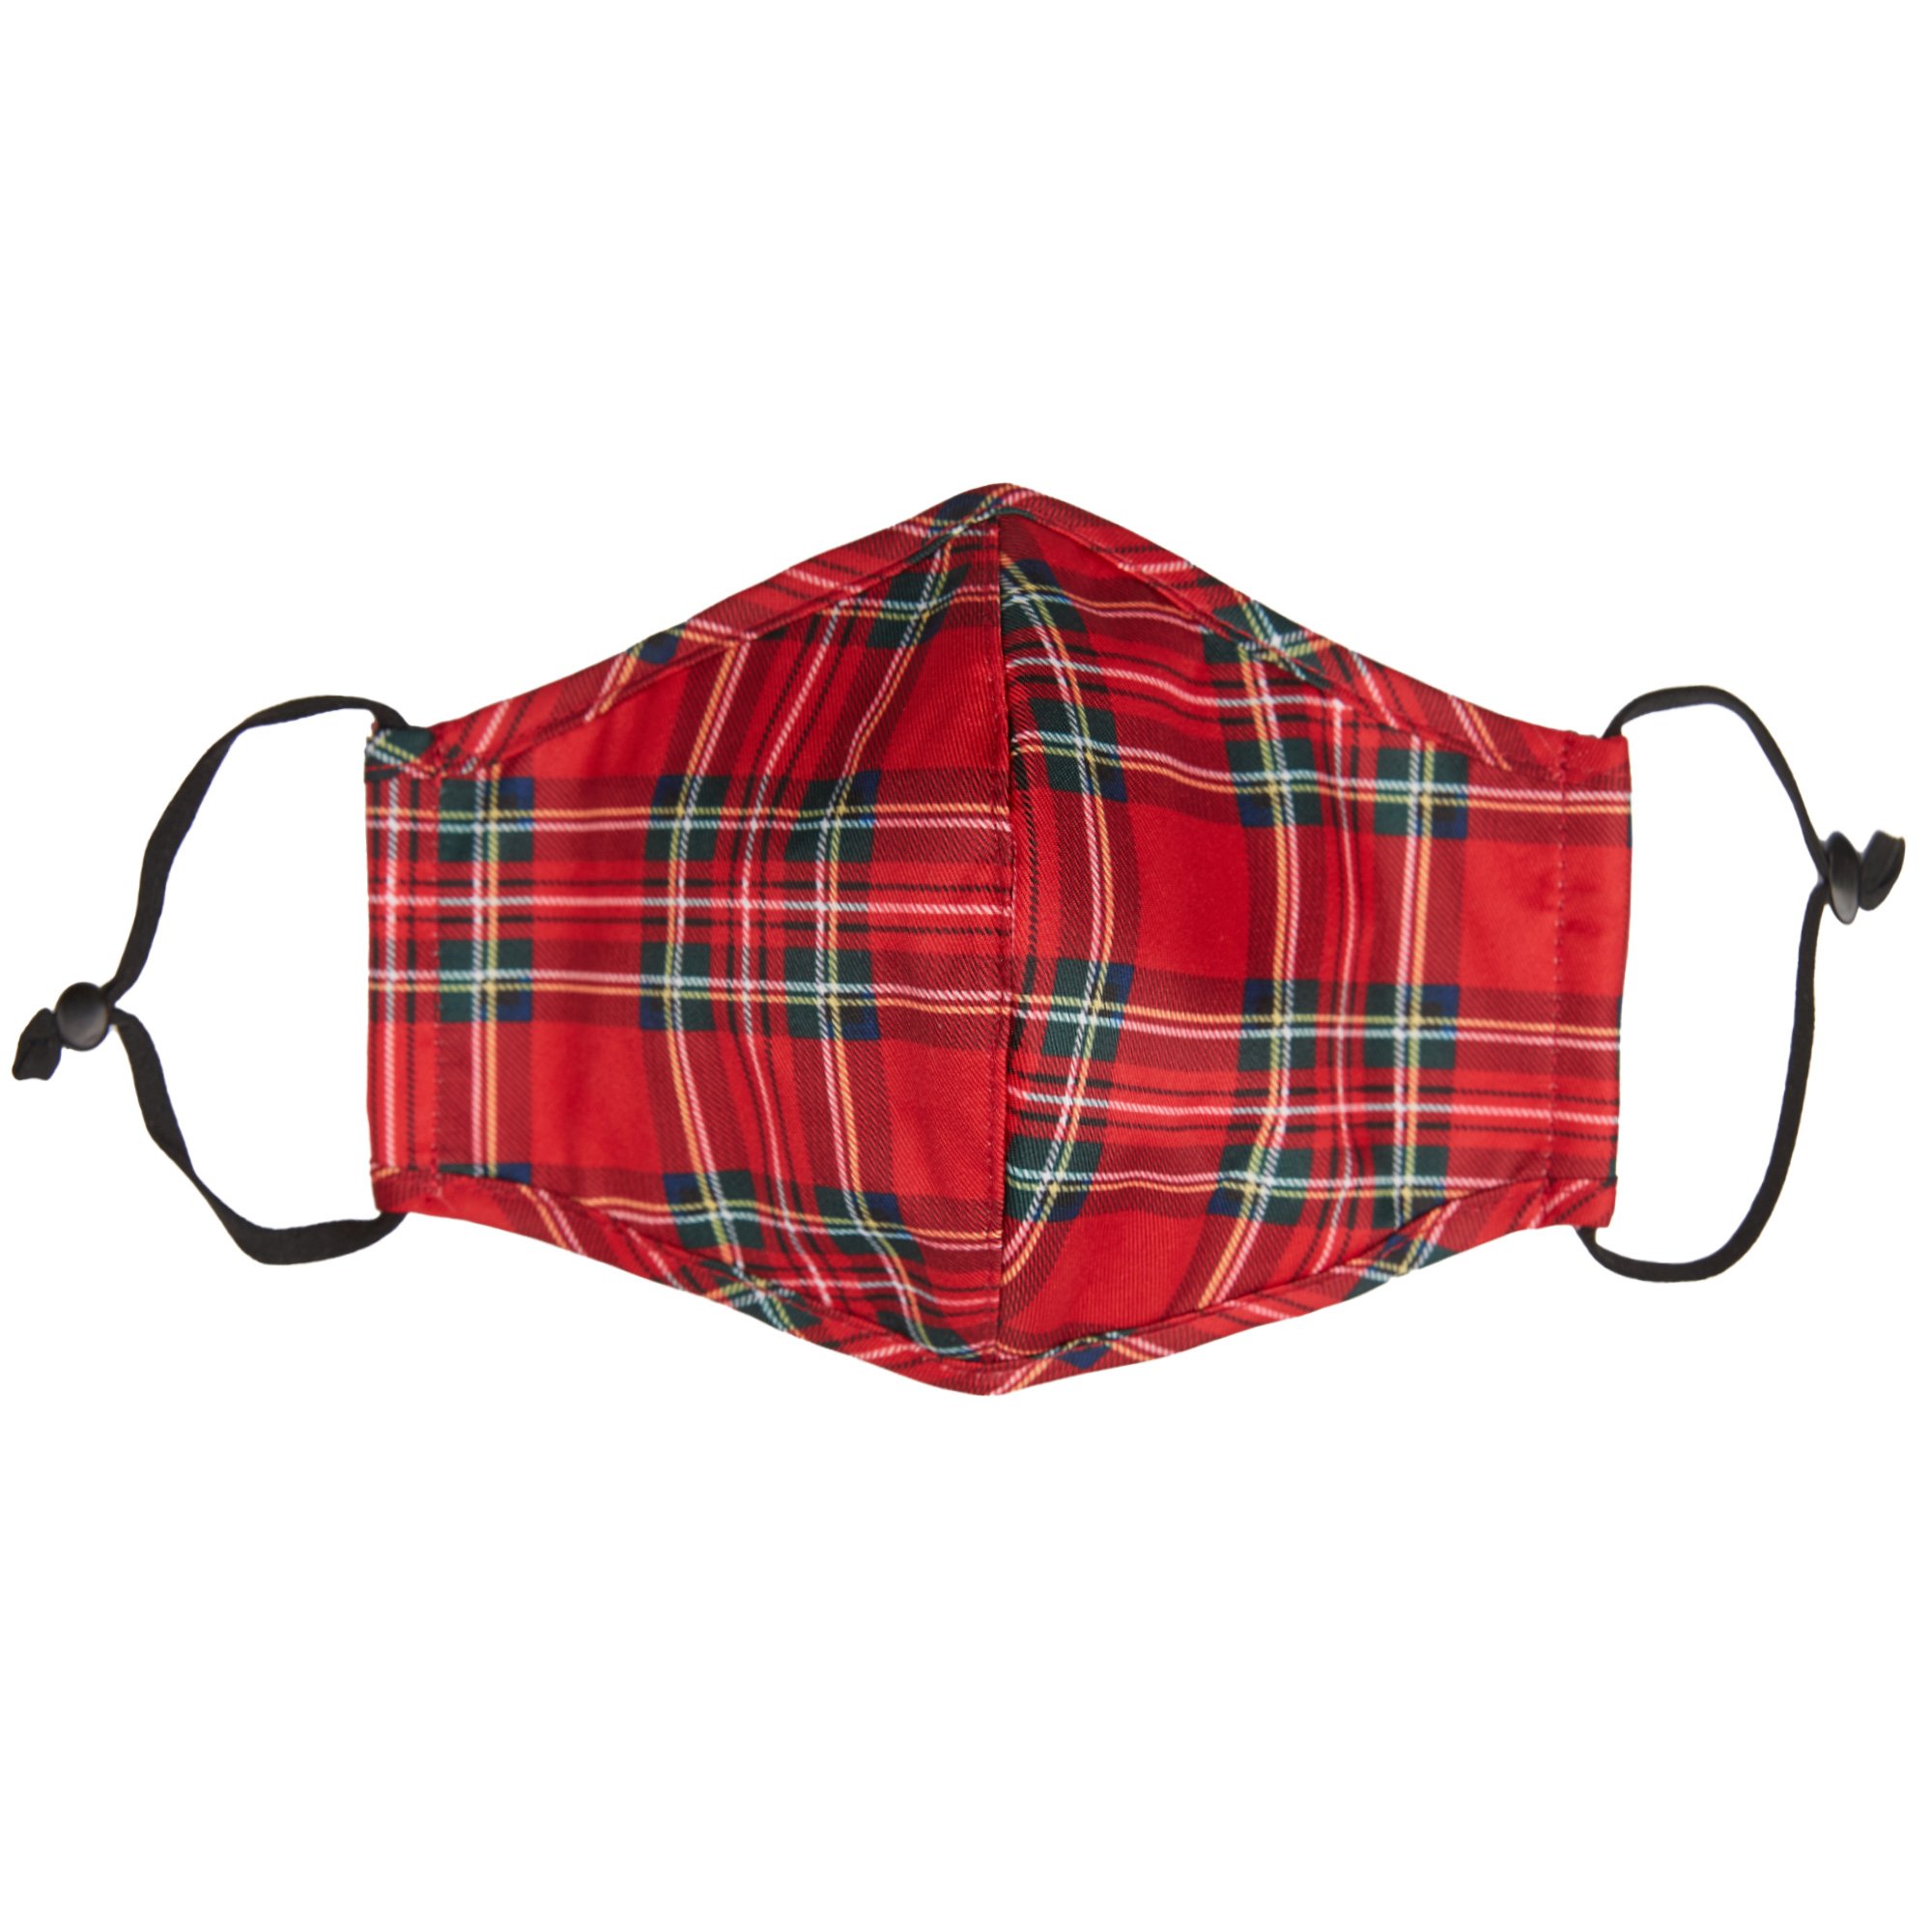 Jacob Alexander Merry Christmas Royal Stewart Red Plaid Men's Vest Clip-On Neck Tie and Adult Face Mask Set - 2XL - image 4 of 8